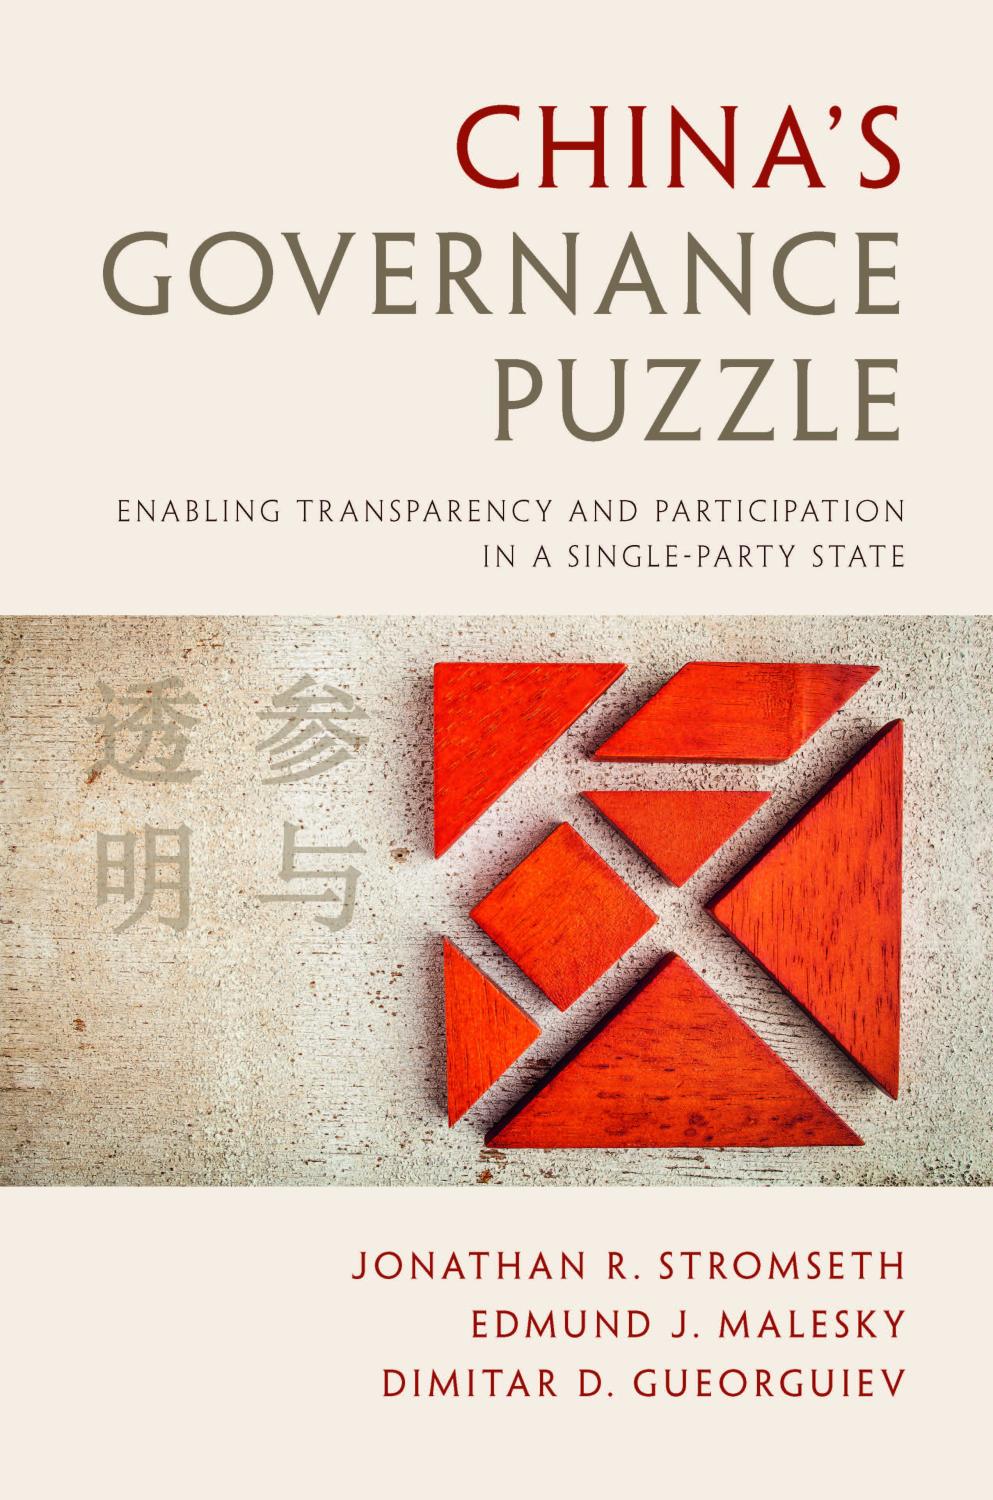 China's Governance Puzzle, book cover